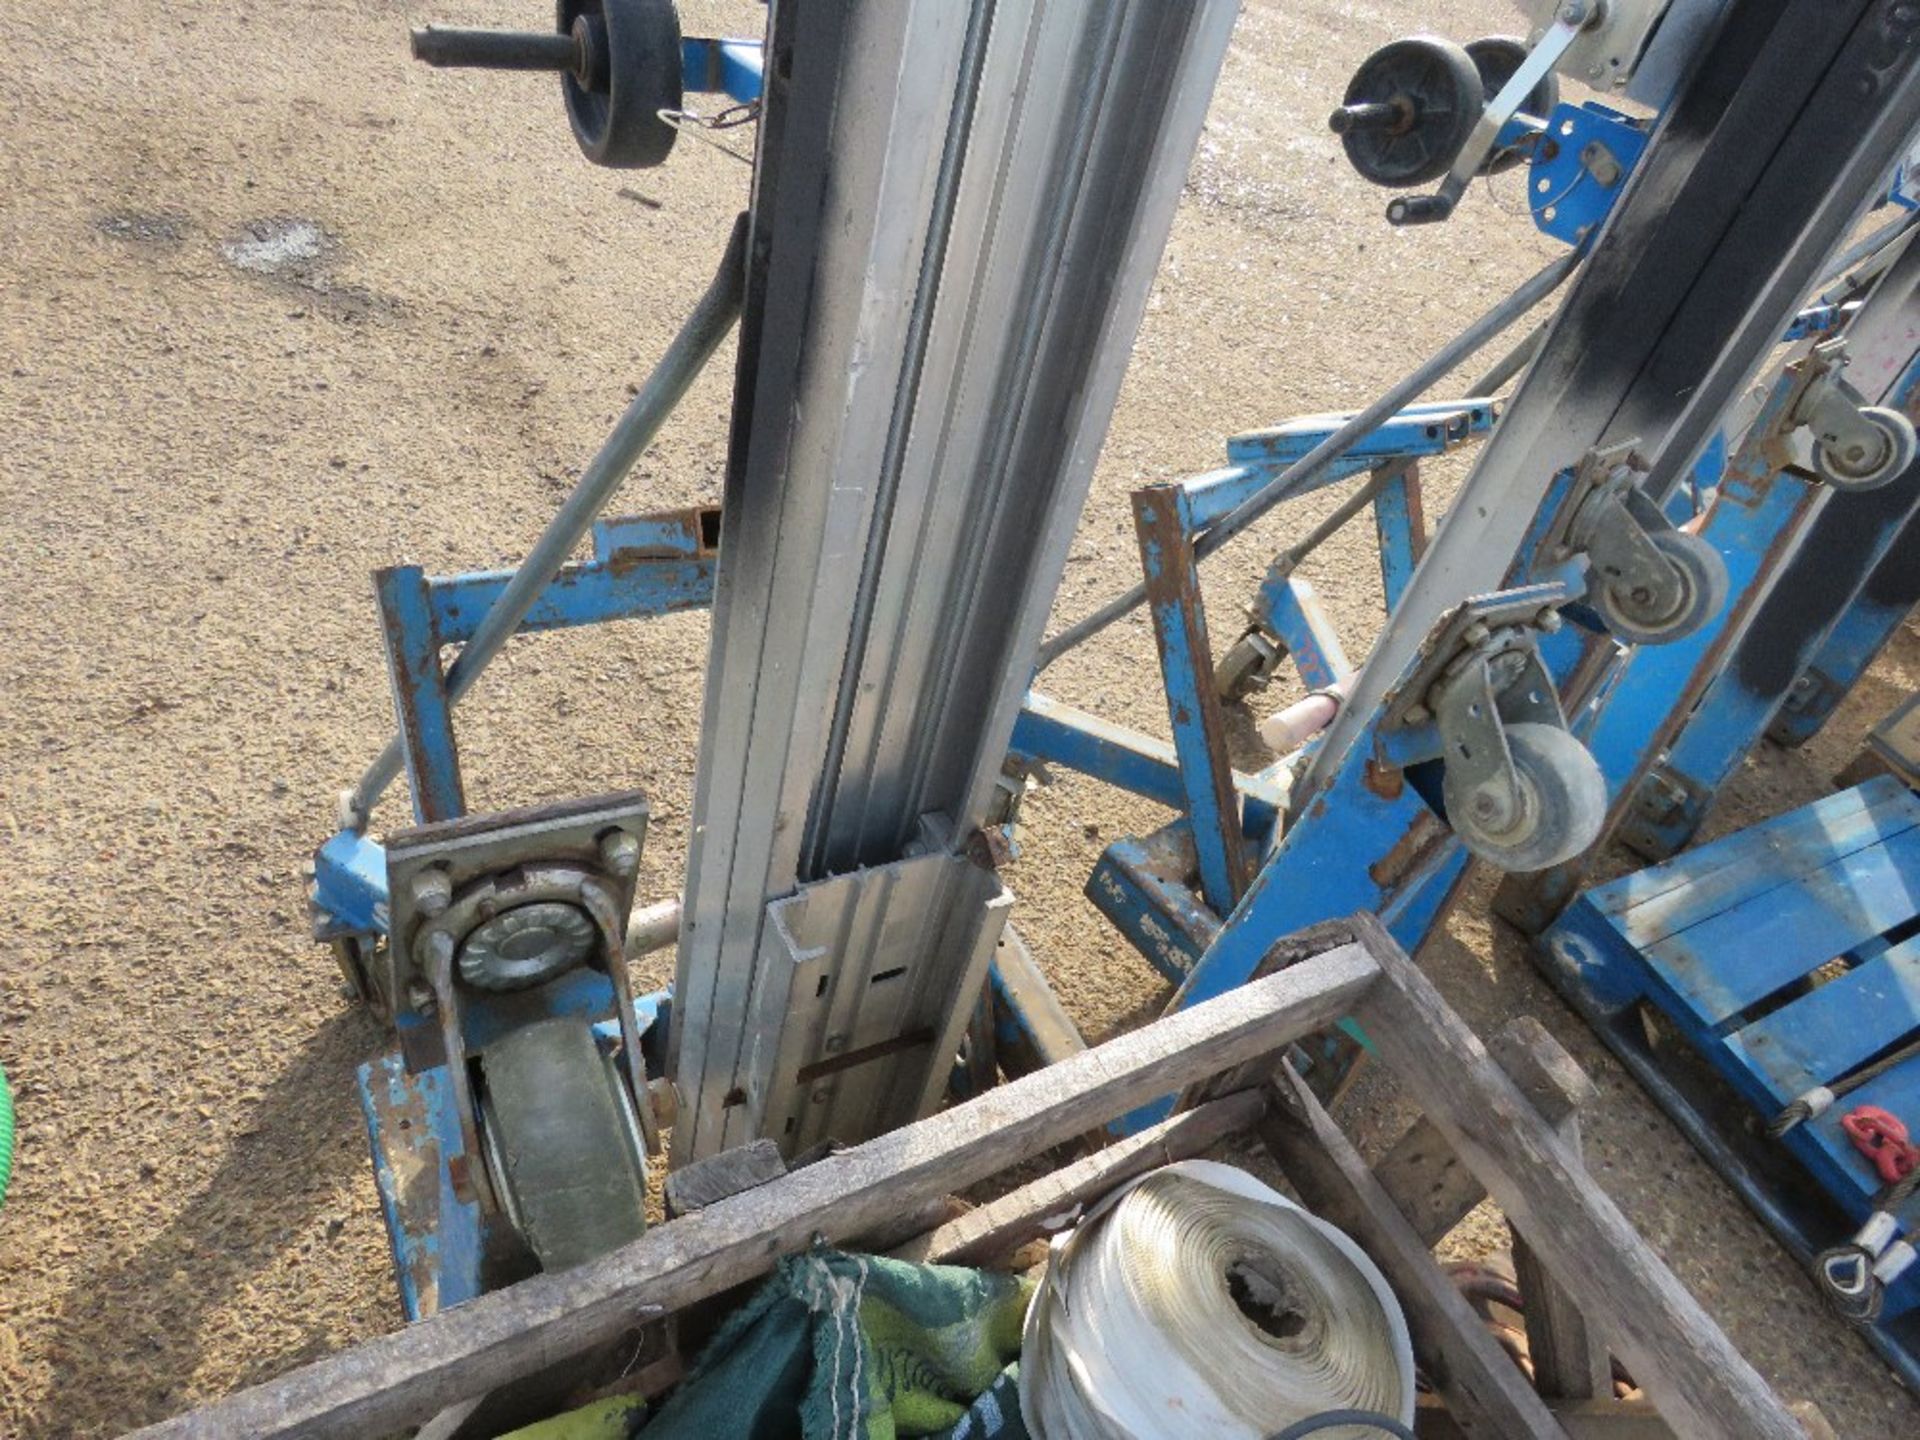 GENIE SLA10 MANUAL OPERTED HOIST / LIFT UNIT WITH FORKS. DIRECT FROM LOCAL COMPANY. - Image 5 of 6